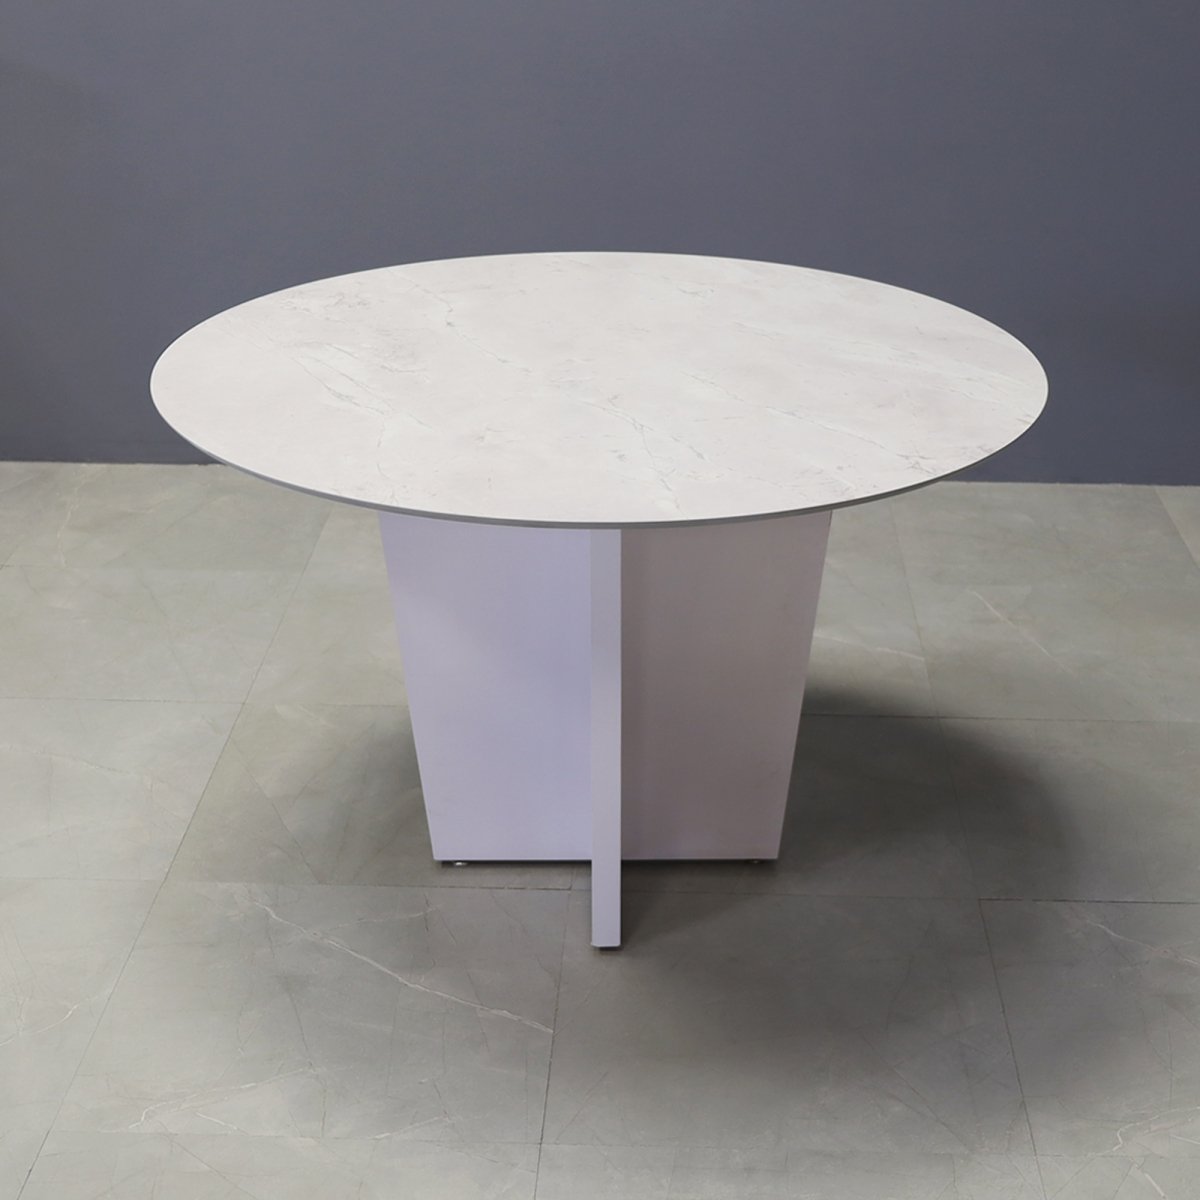 Aurora Round Conference Table in Sterling Calcutta Engineered Stone Top - 47 In. - Stock #48